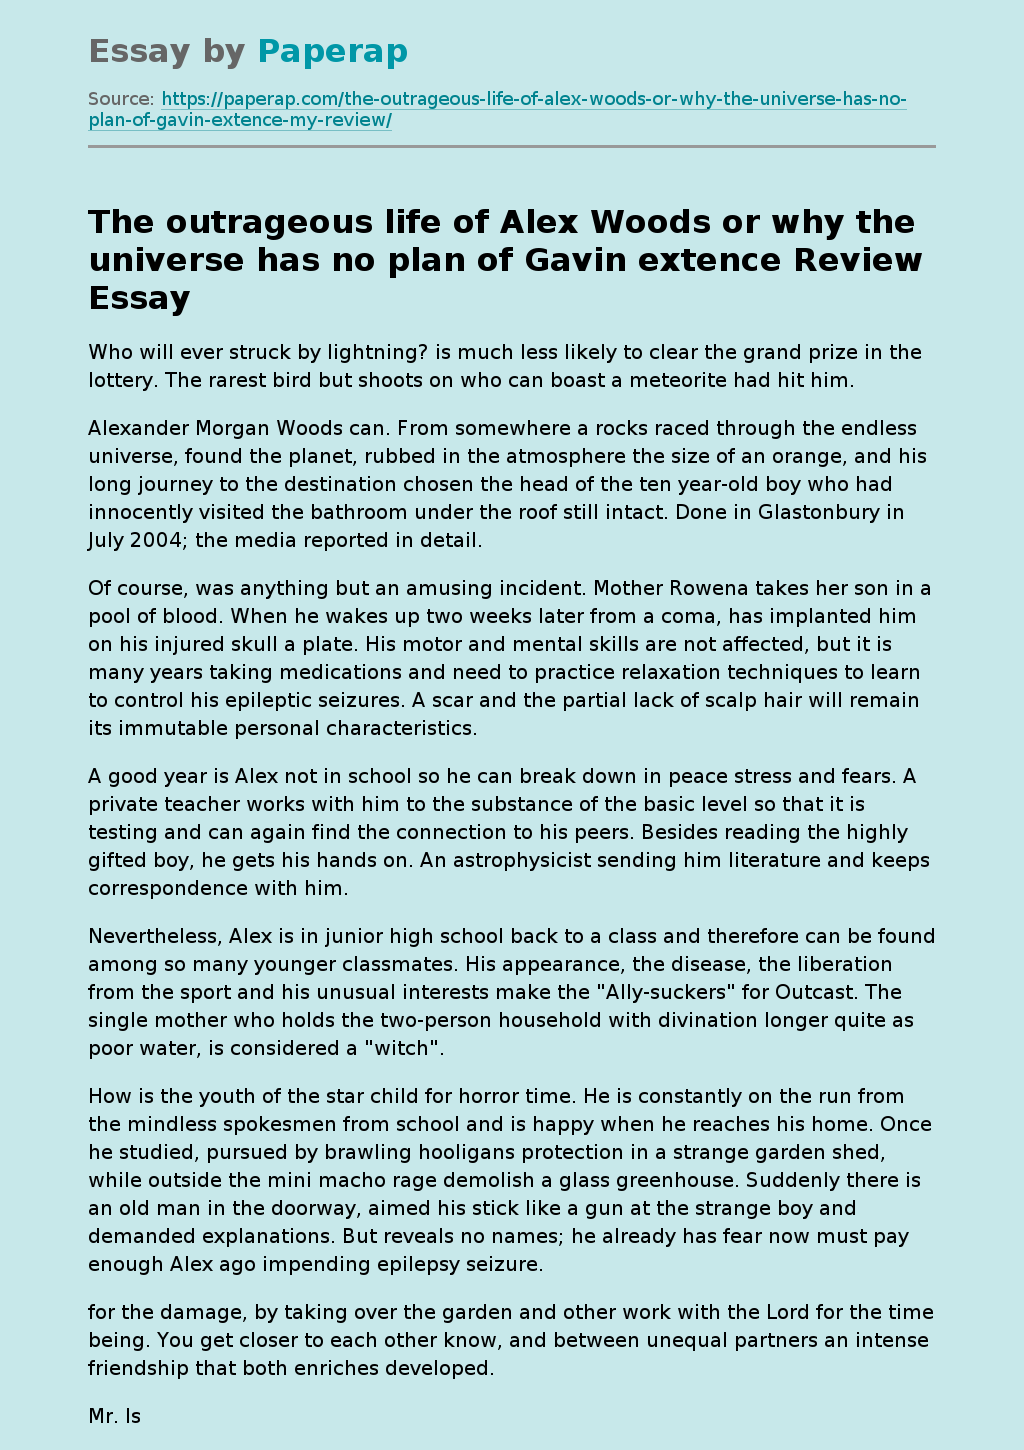 The outrageous life of Alex Woods or why the universe has no plan of Gavin extence Review